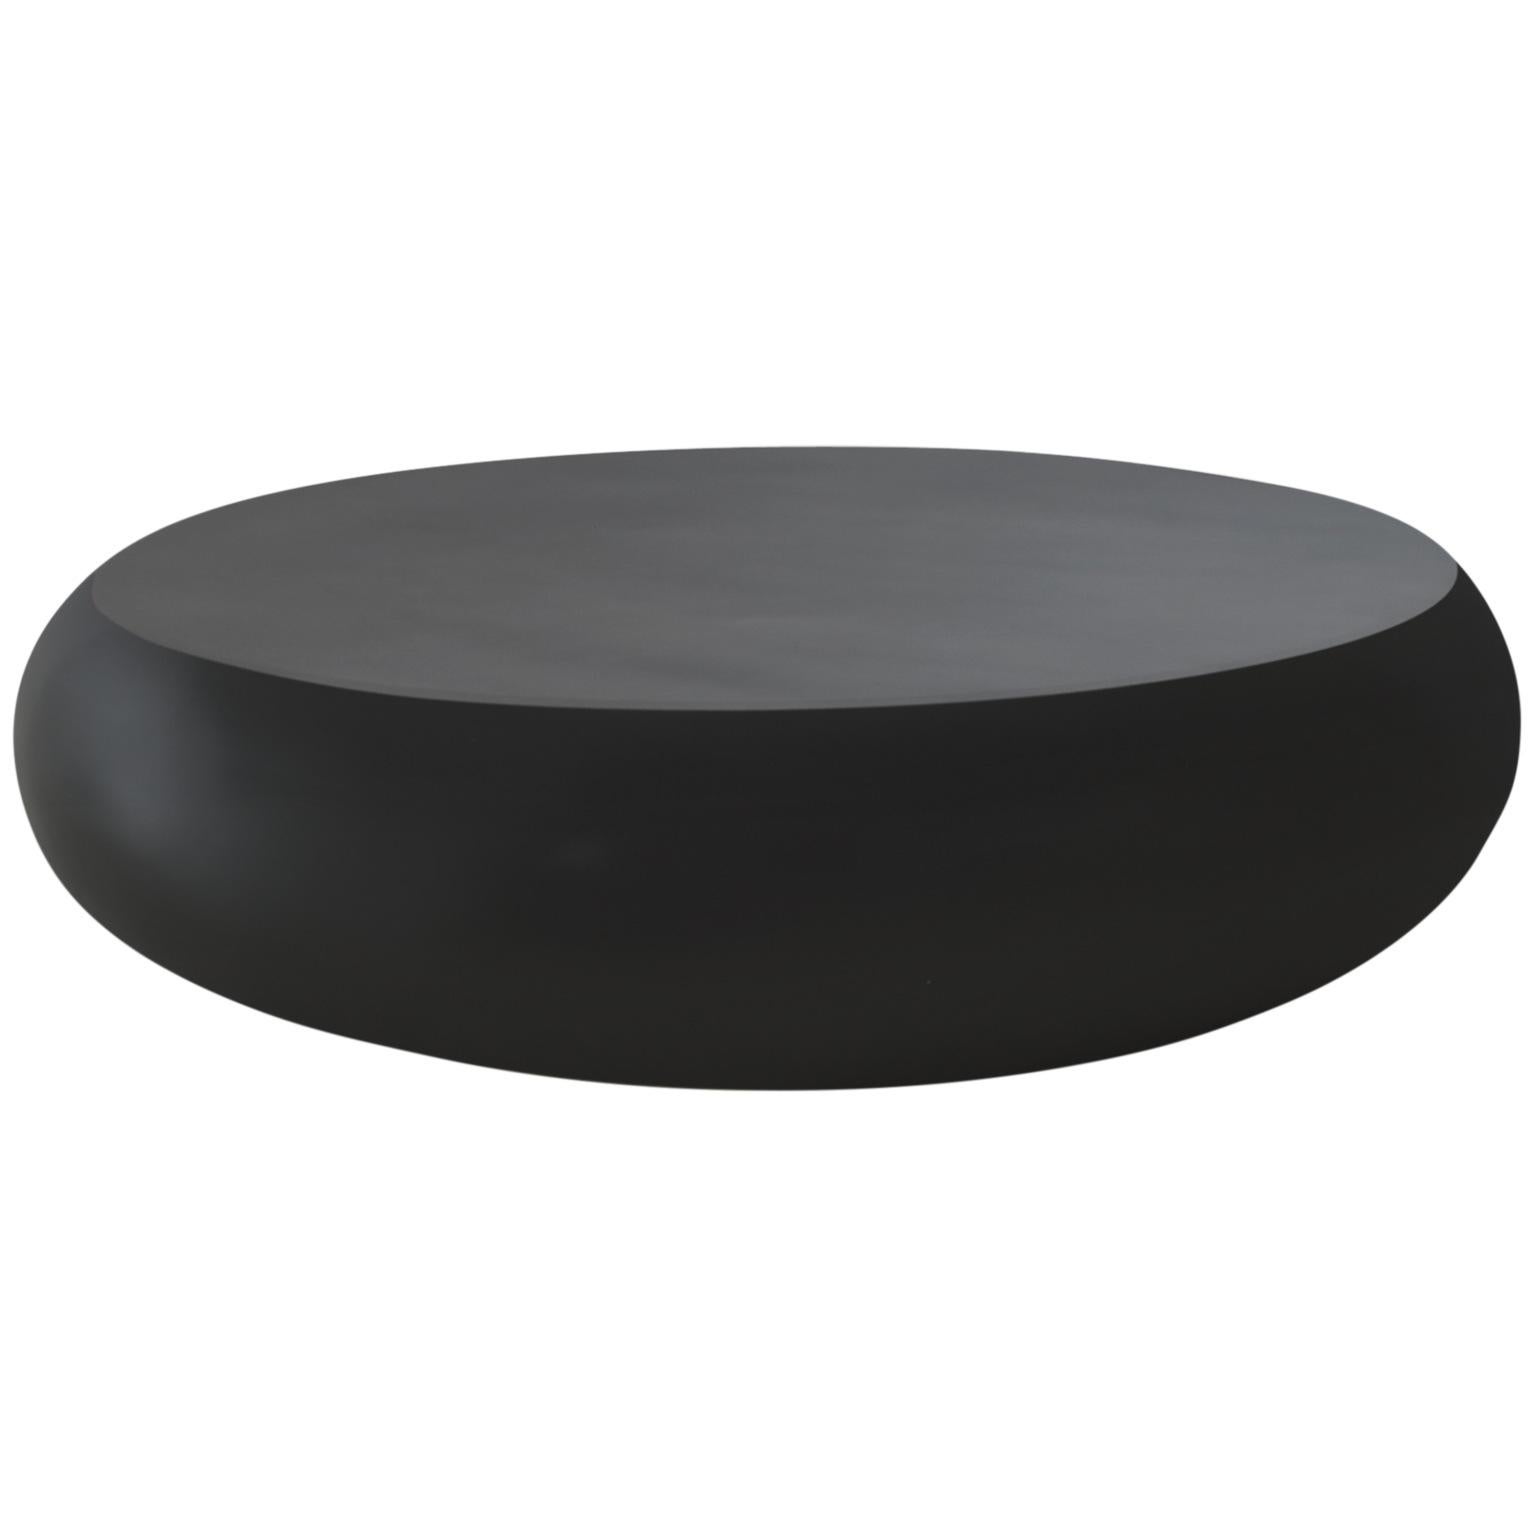 Varnished 21st Century Verter Turroni Black Fibreglass Coffee Table Seat Outdoor Furniture For Sale